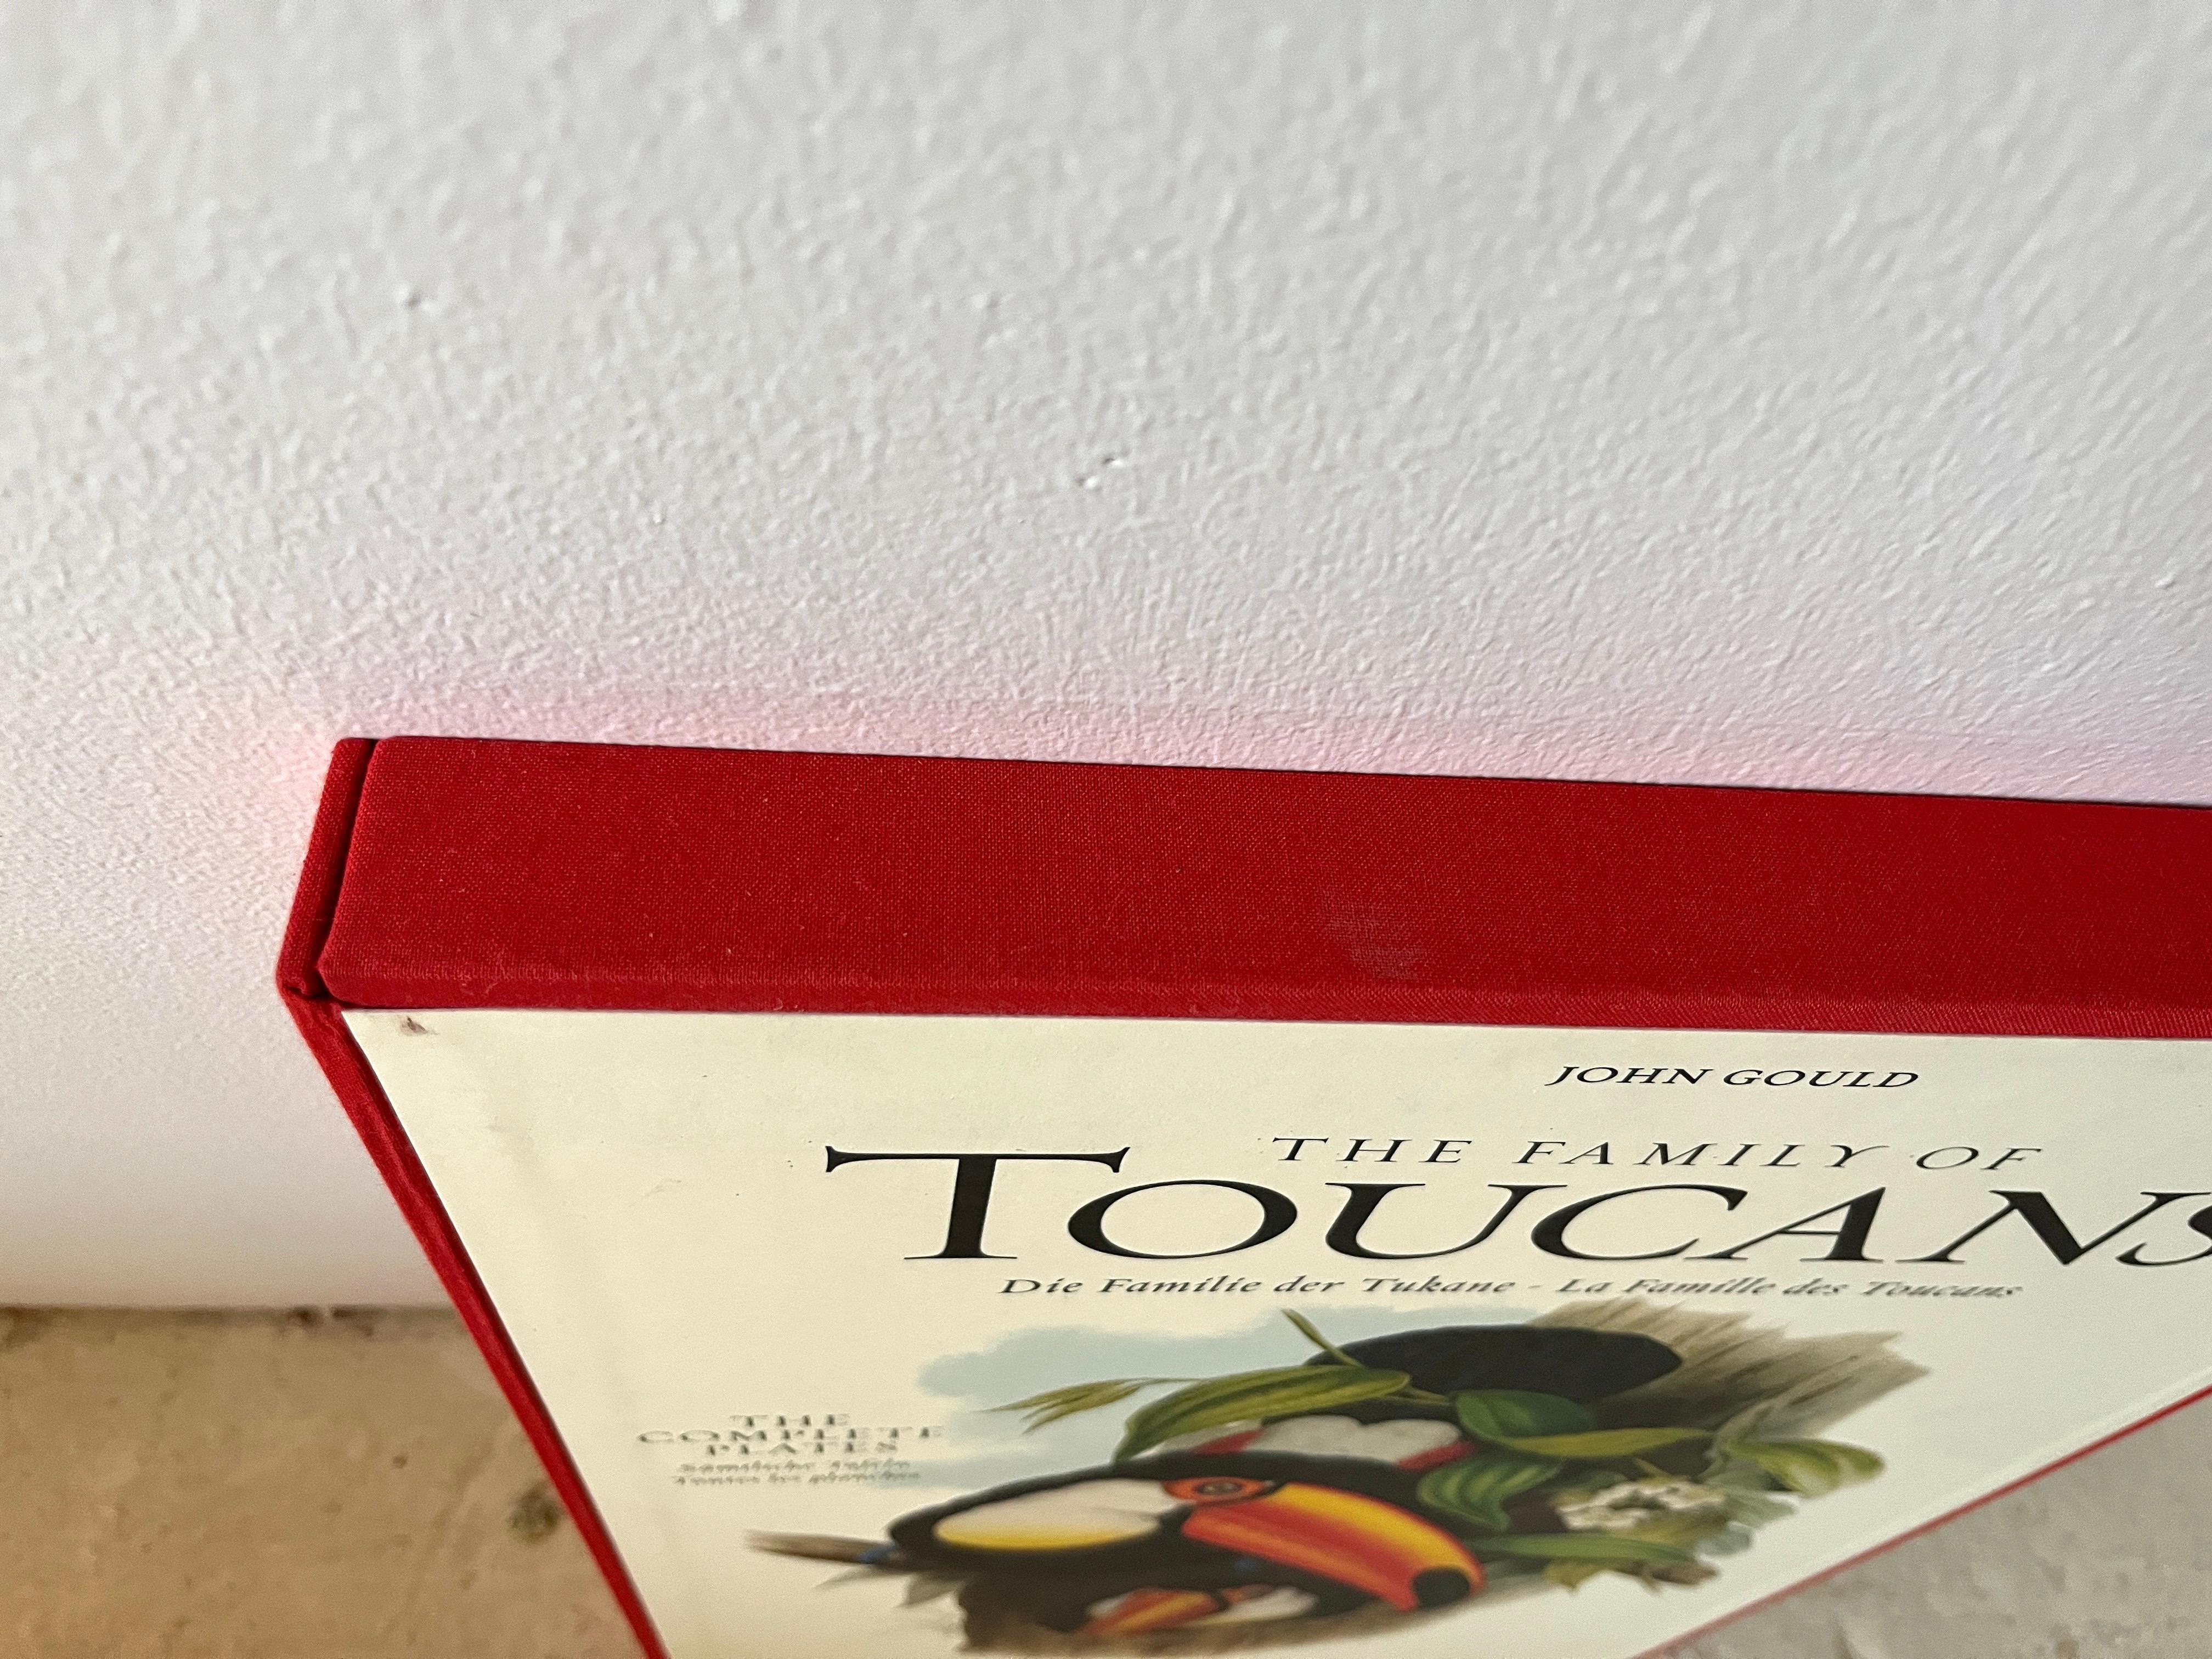 This new in box set of 51 reproduction prints is Taschen’s resuscitation of John Gould’s original ~1850 series of prints. The Family of Toucans comes in an impressively unwieldy box, measured at 13.3 by 19.3 inches. Inside is a 31-page booklet in